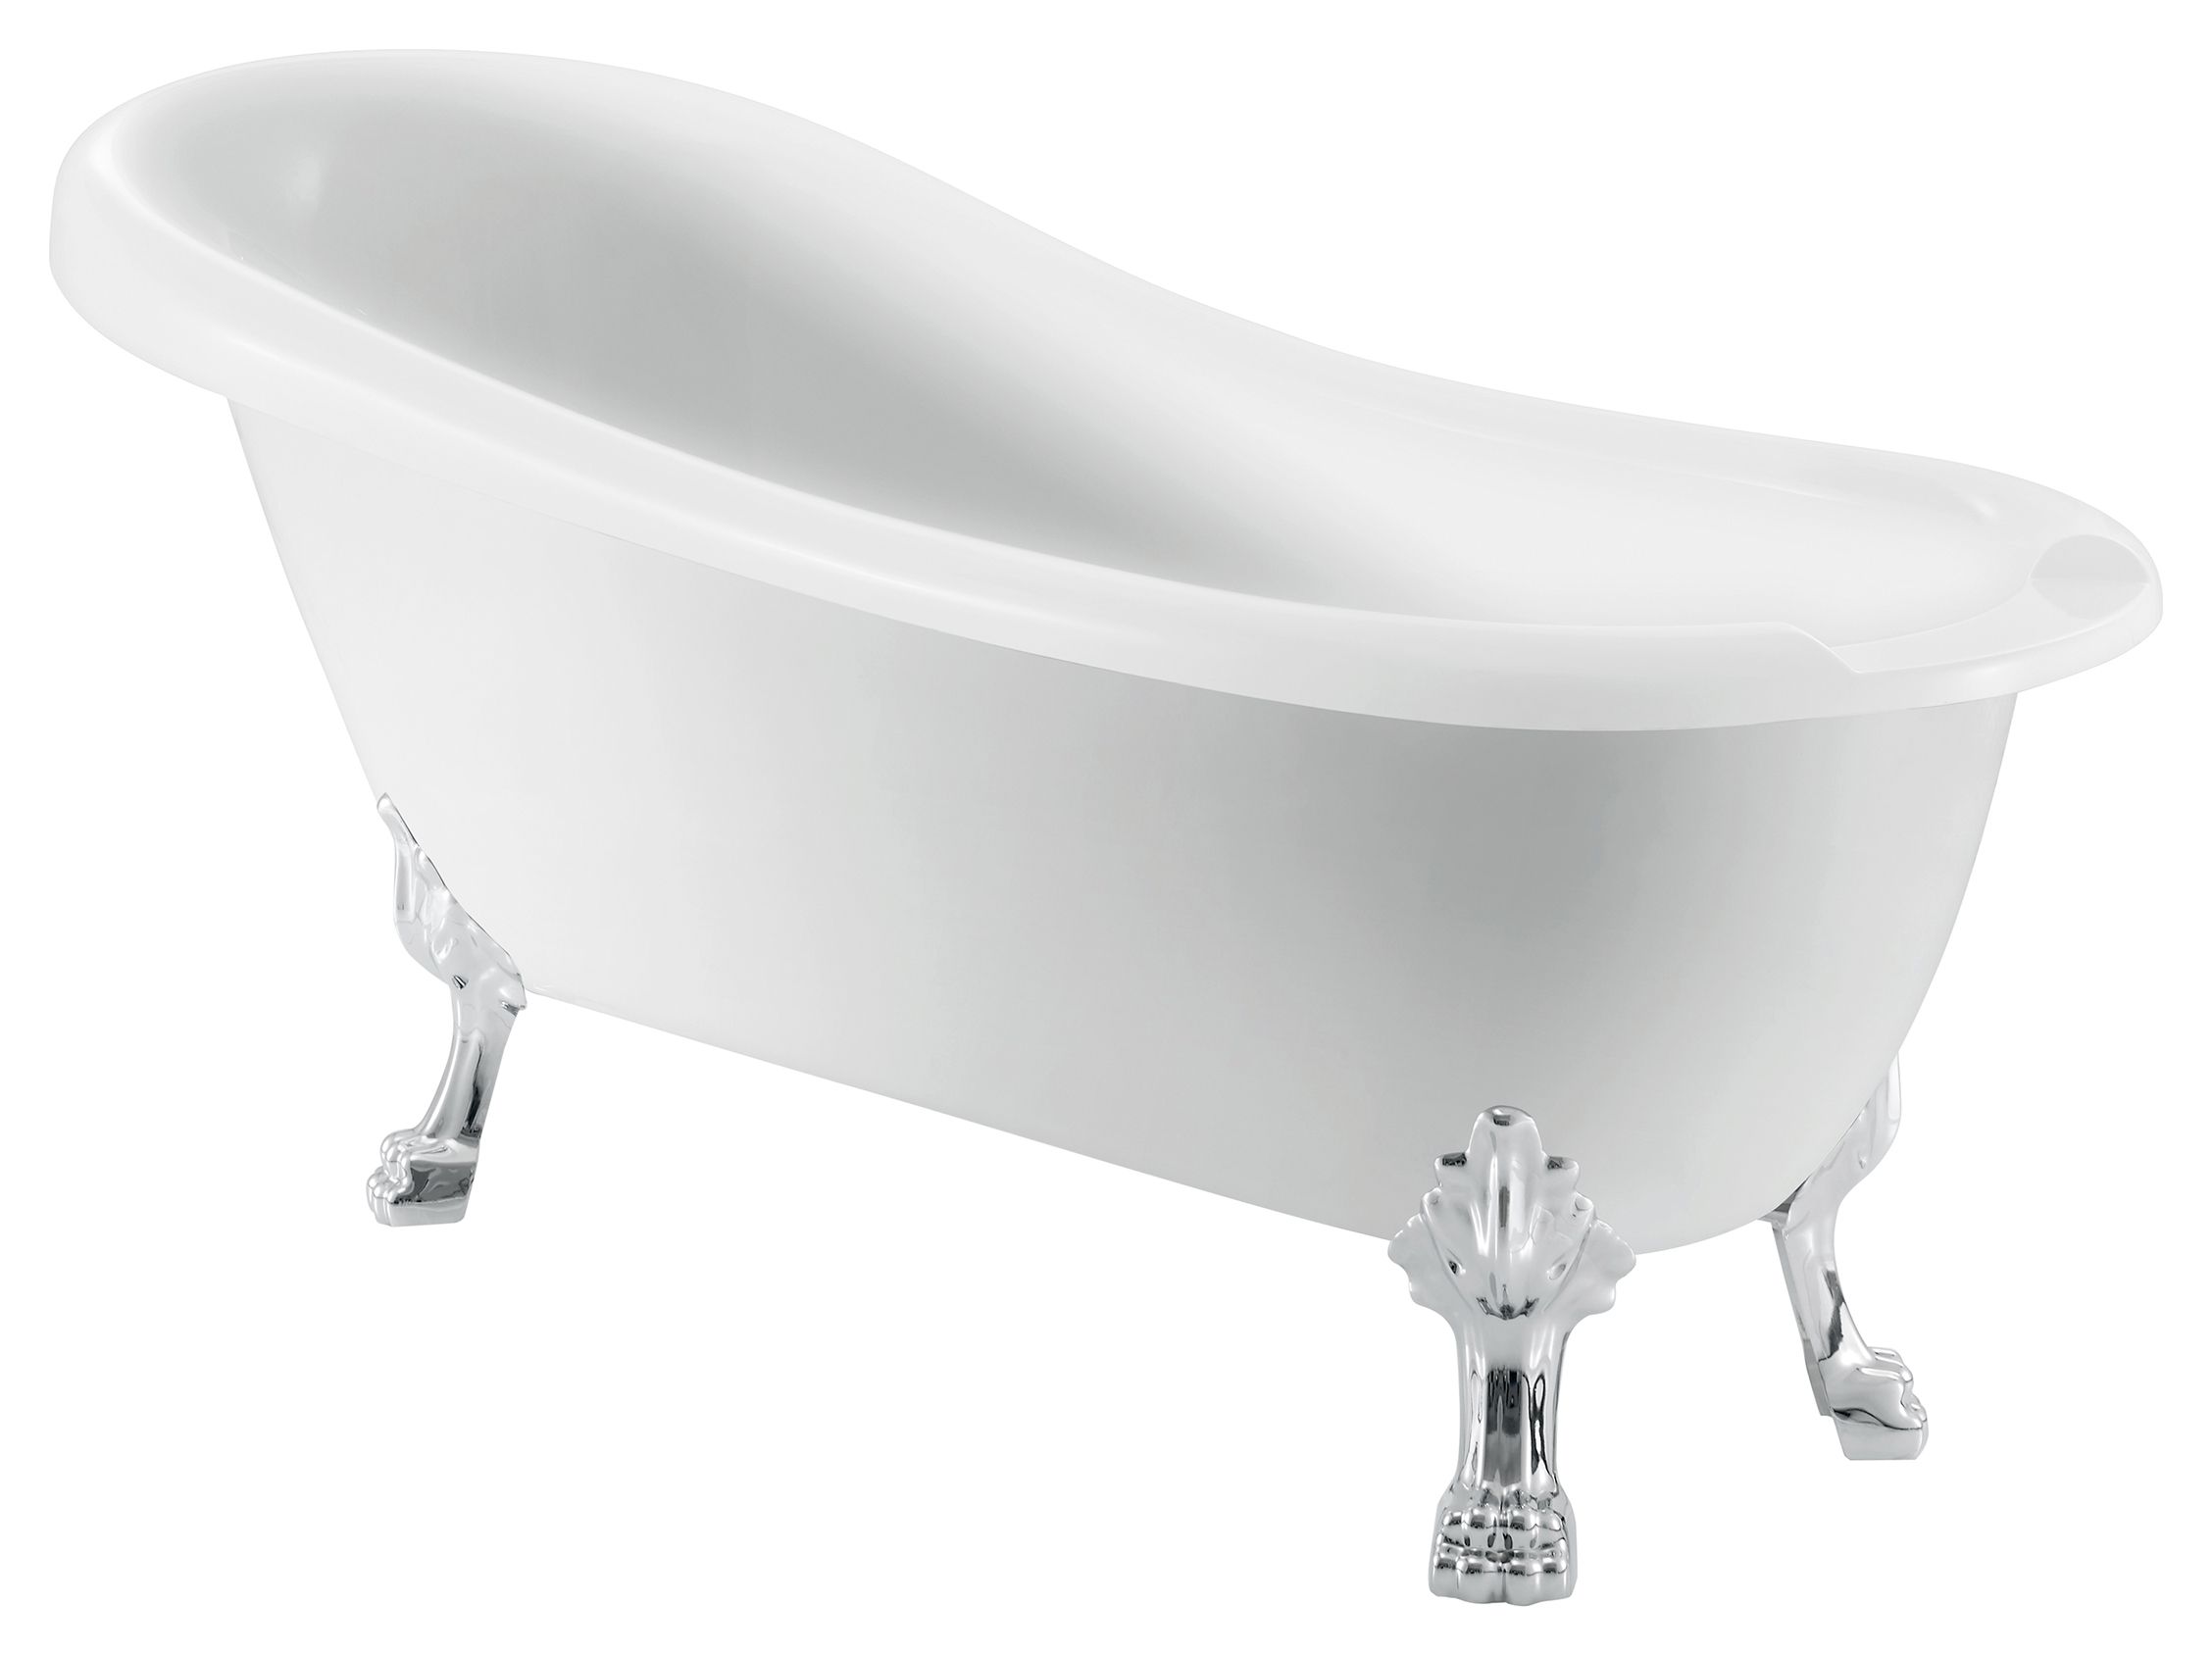 Wickes Bombay Freestanding Traditional Single Ended Roll Top Slipper Bath - 1710 x 740mm